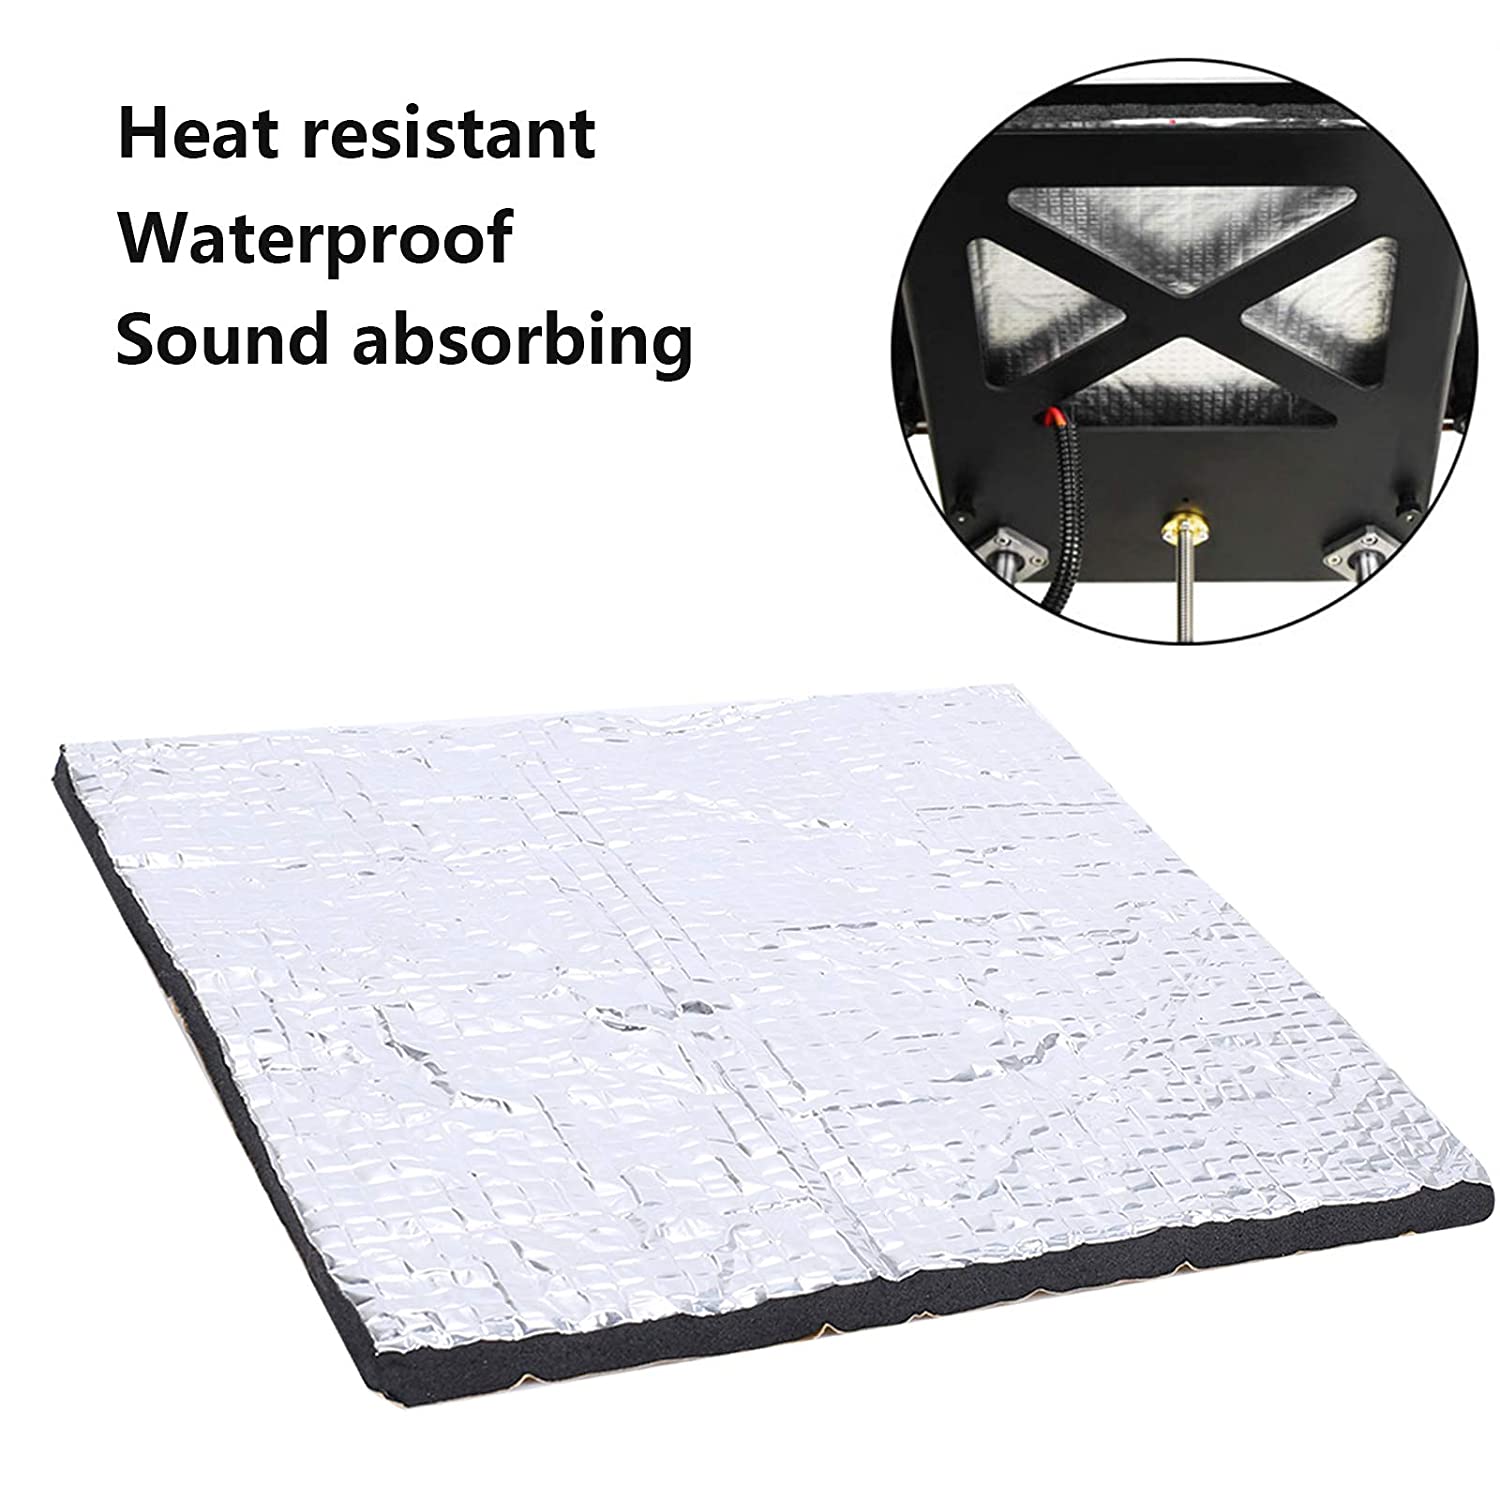 220*220mm Heated Bed Foil Self-Adhesive Insulation Cotton Mat for 3D Printer Heatbed